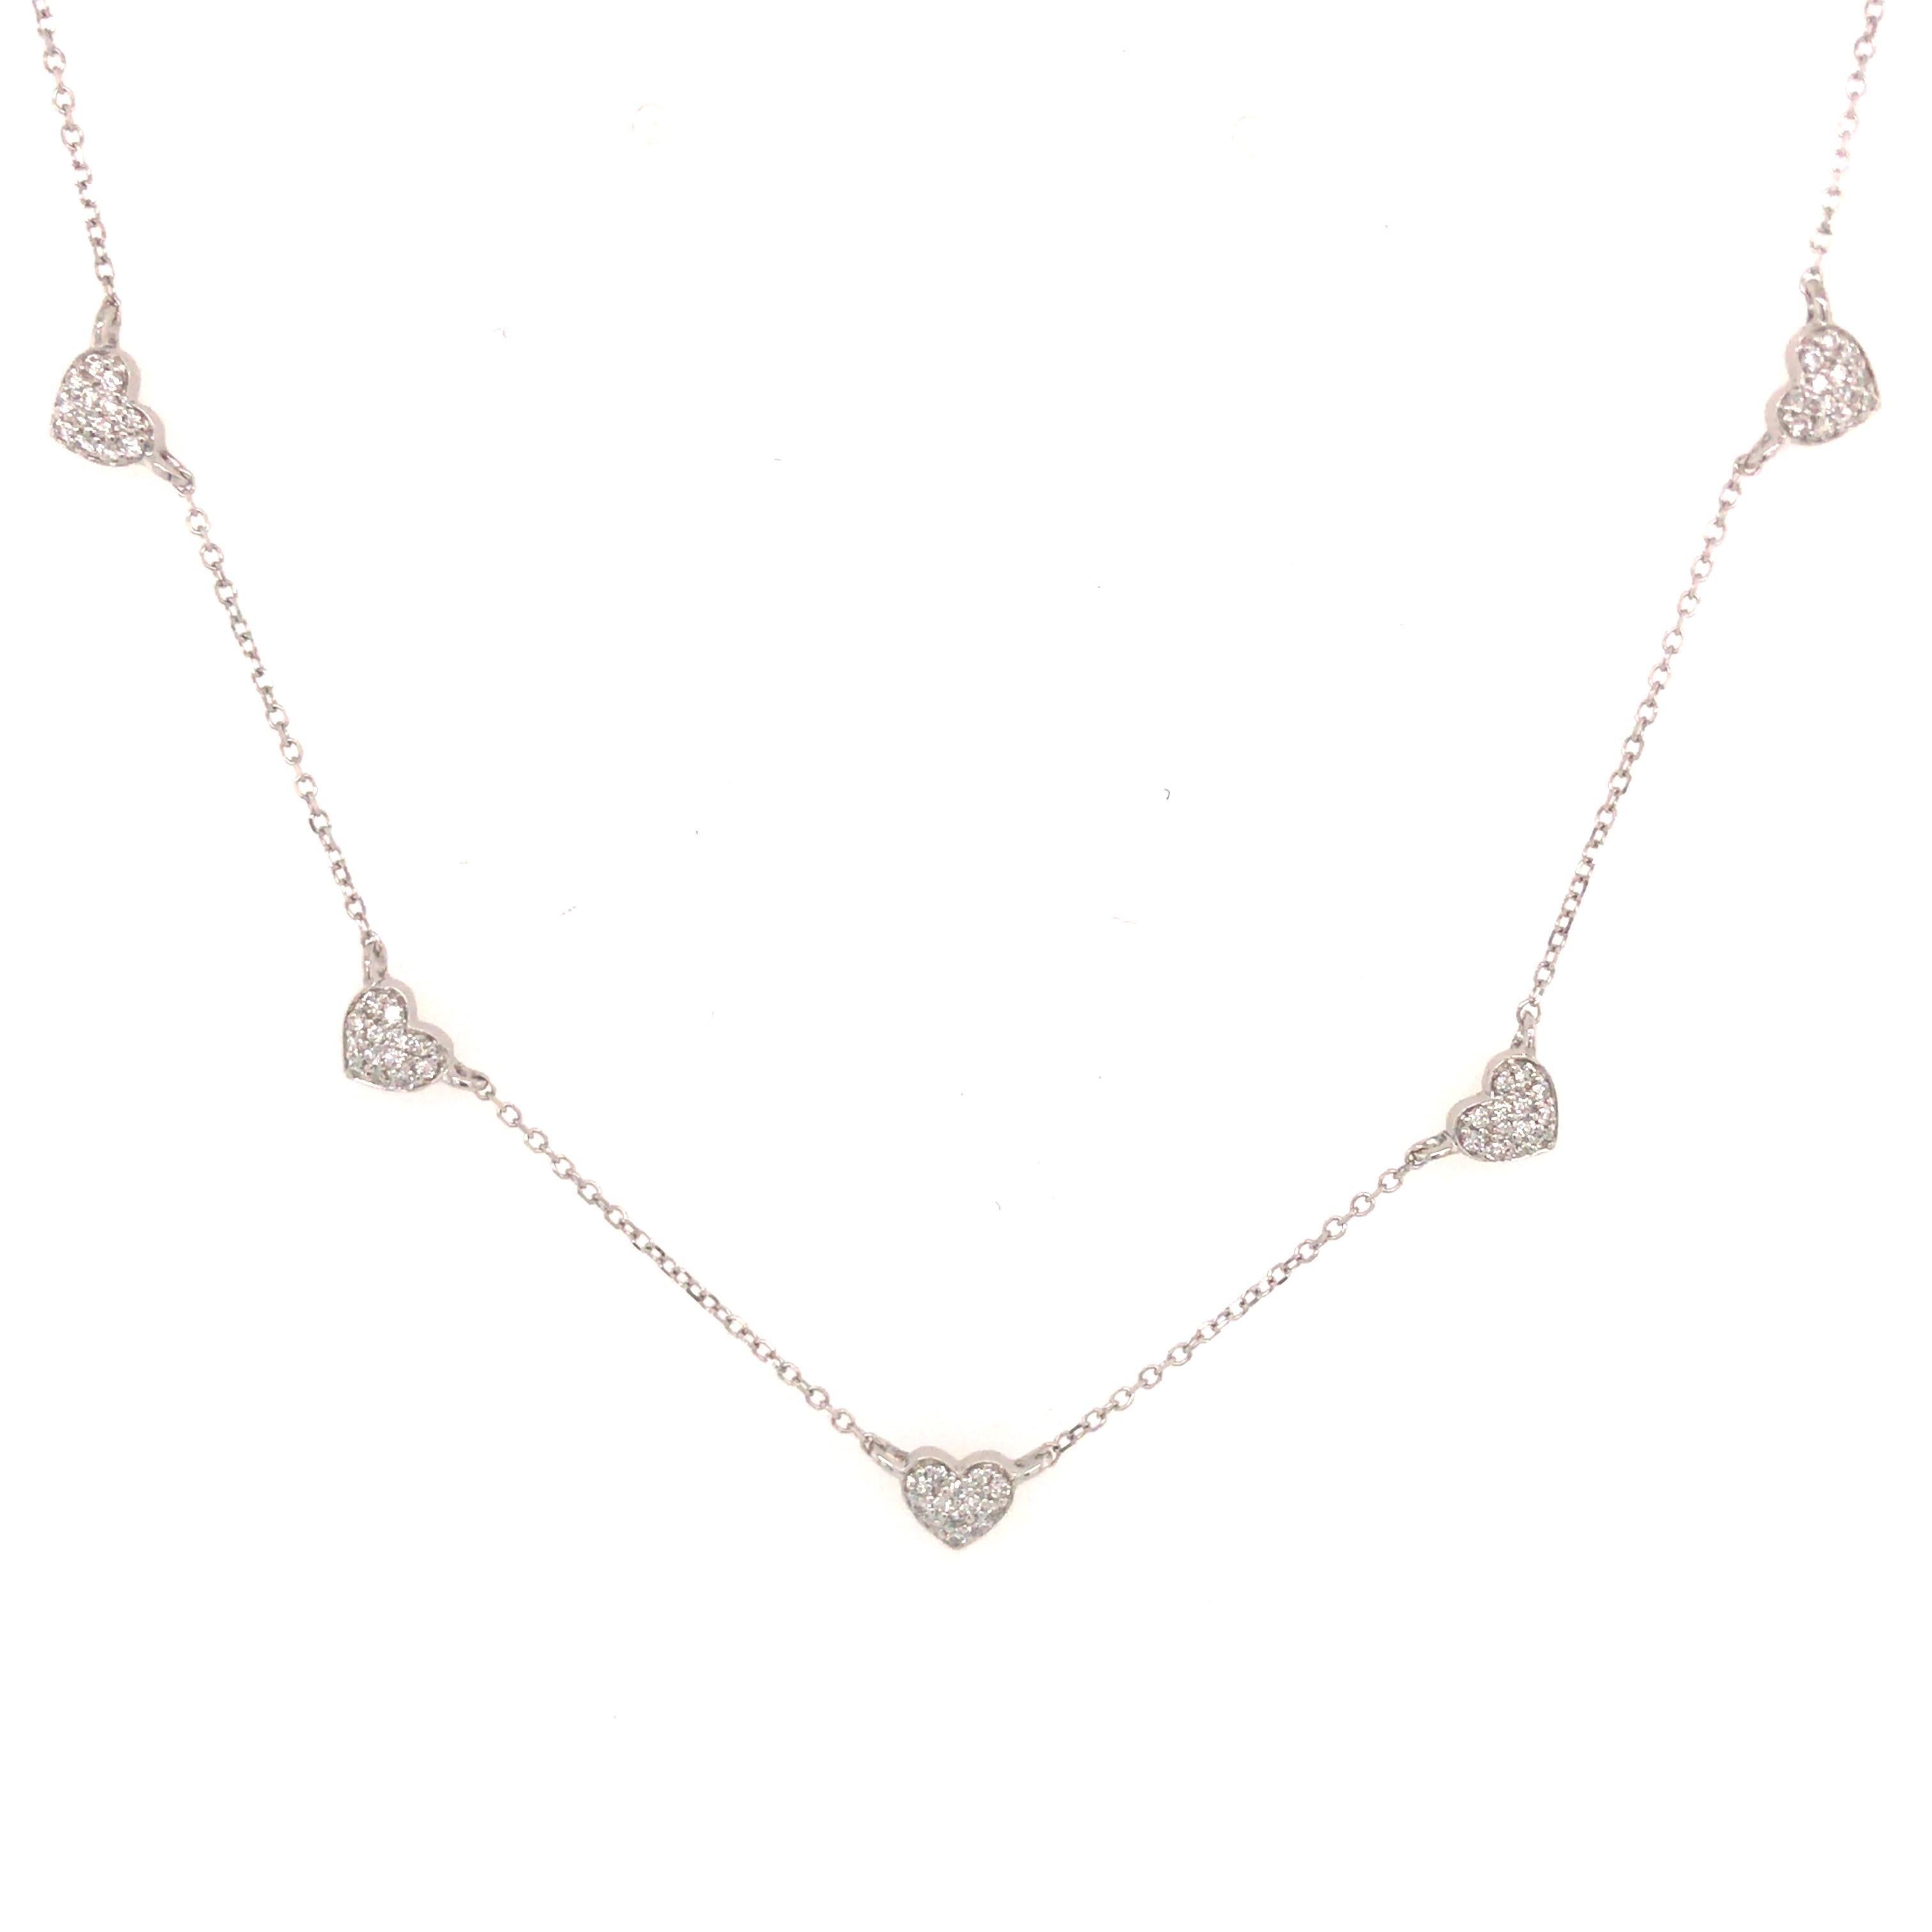 Round Cut Diamond Heart Shaped Cluster Station Necklace in 14 Karat White Gold